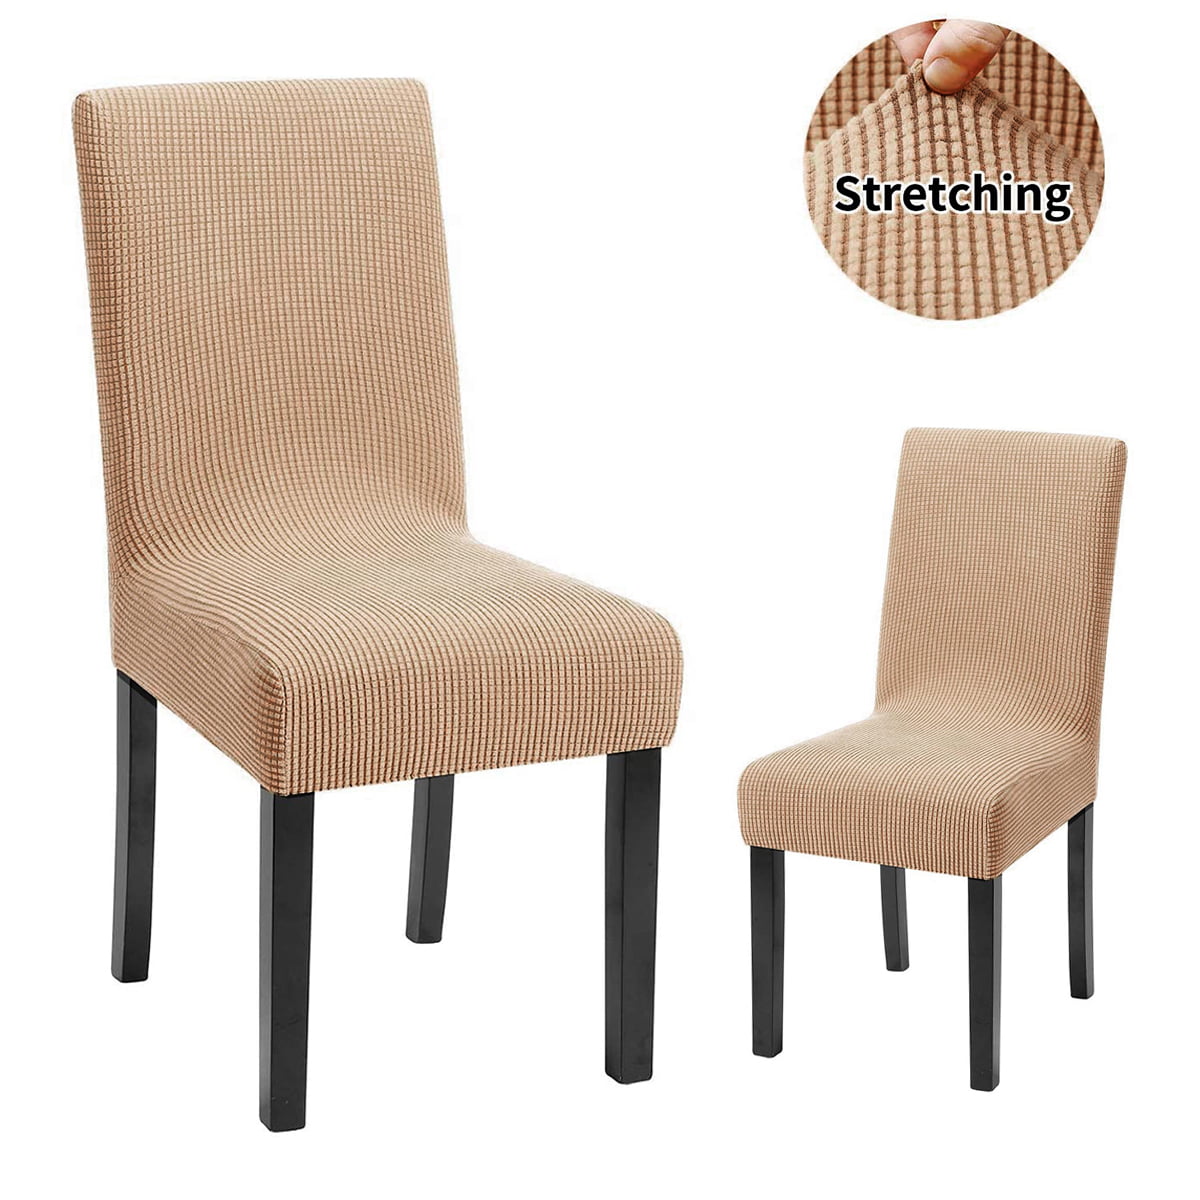 Details about   Chair Covers Banquet Dining Kitchen Spandex Elastic Stretch Seat Case Slipcover 